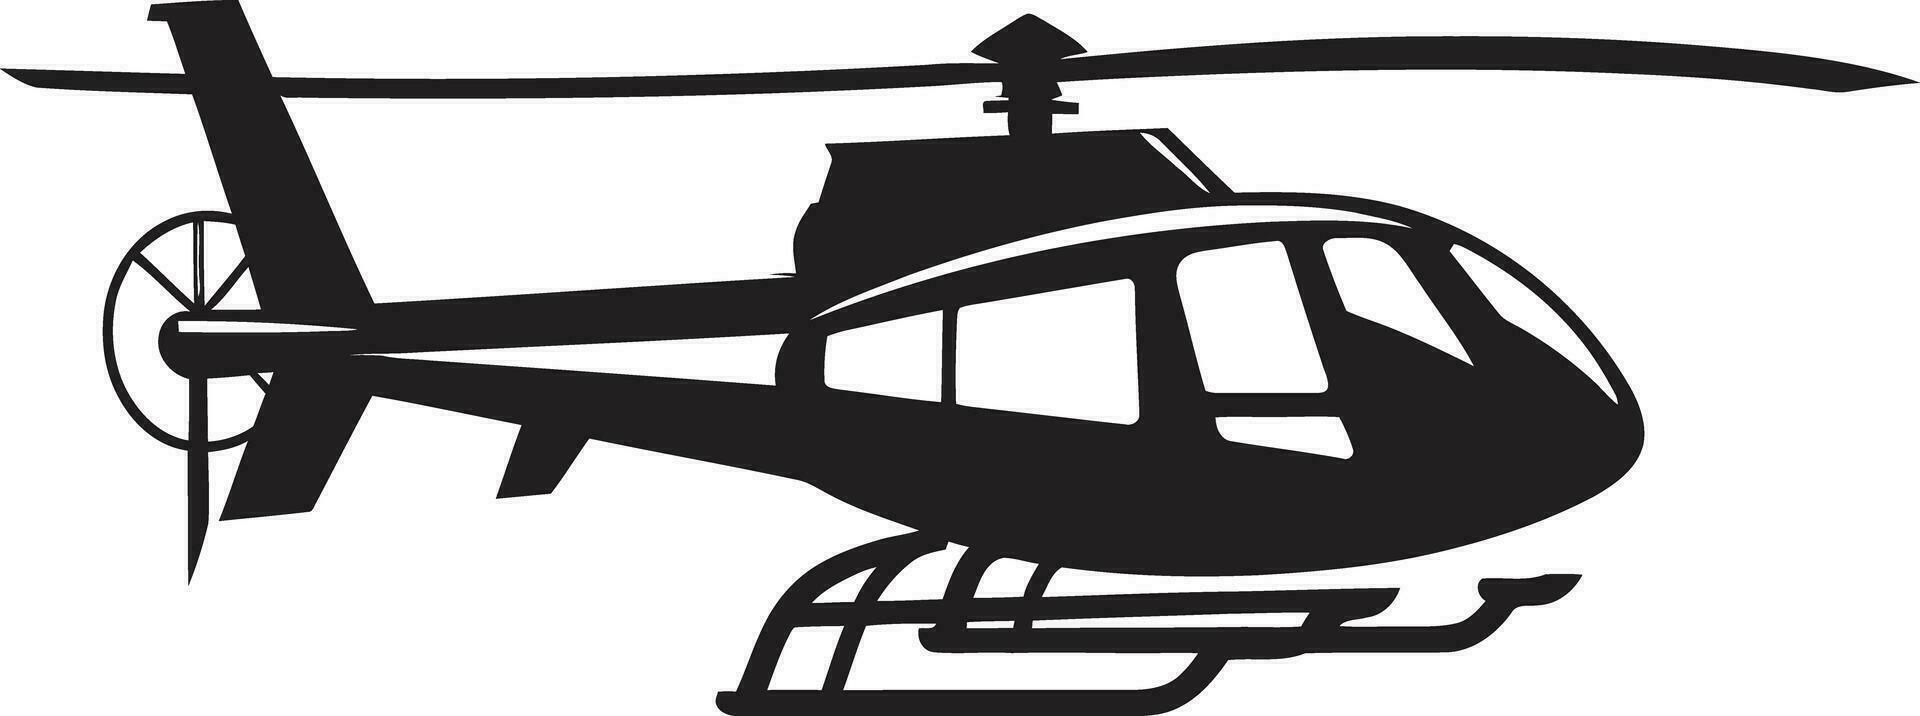 High Flying Creations Helicopter Vector Art Gallery Rotor Revolution Creative Helicopter Vectors